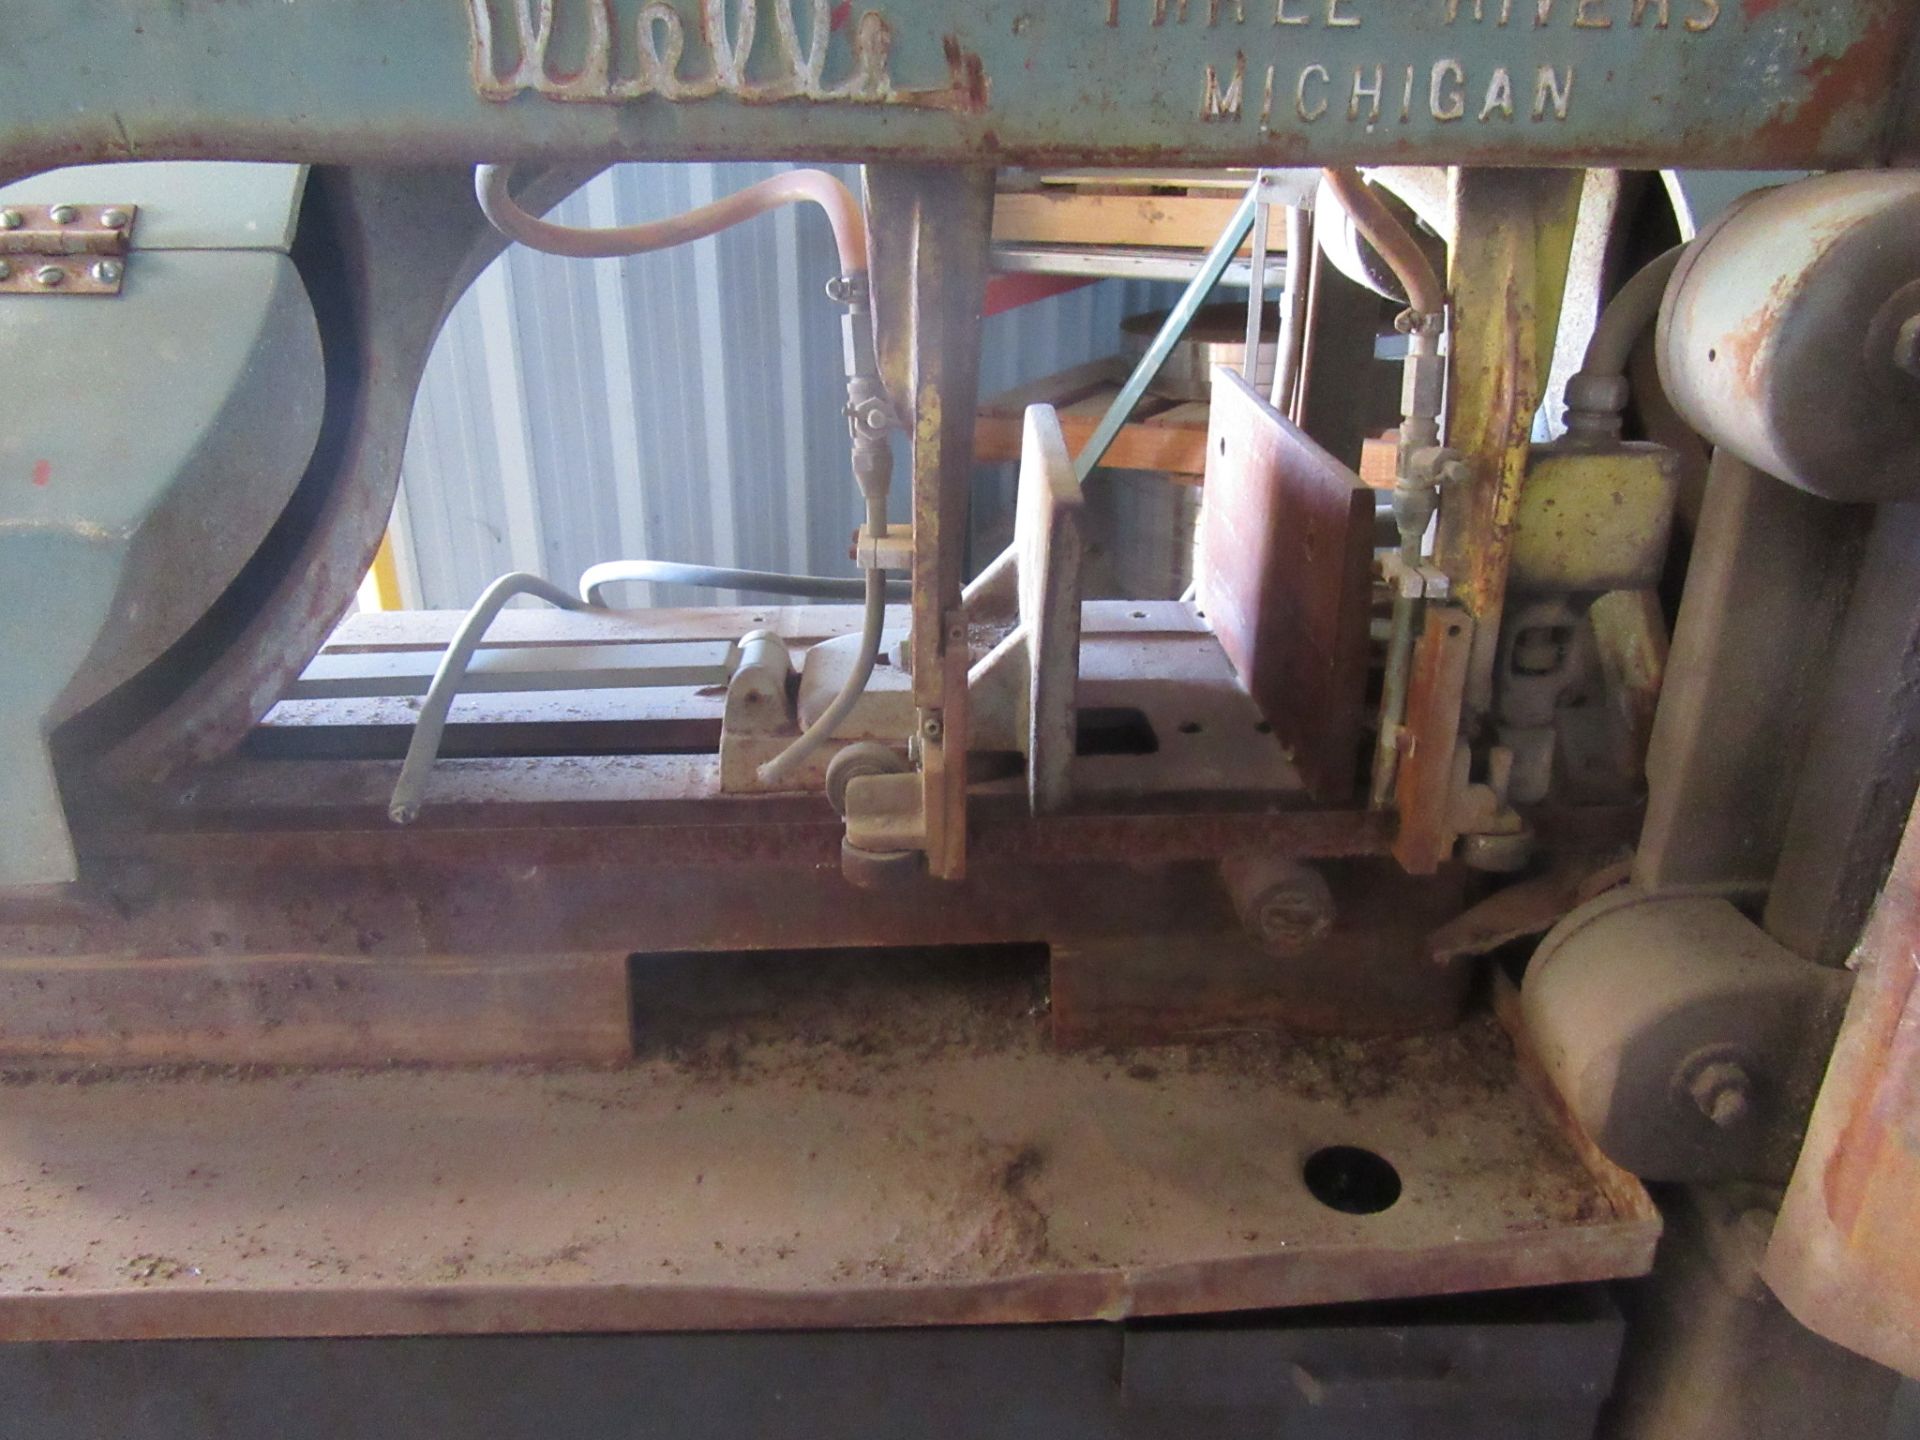 WF WELLS 12'' HORIZONTAL BAND SAW, MODEL: 1270, MISSING AC CABLE, (LOCATION: 10097 US HIGHWAY 50 E) - Image 2 of 3